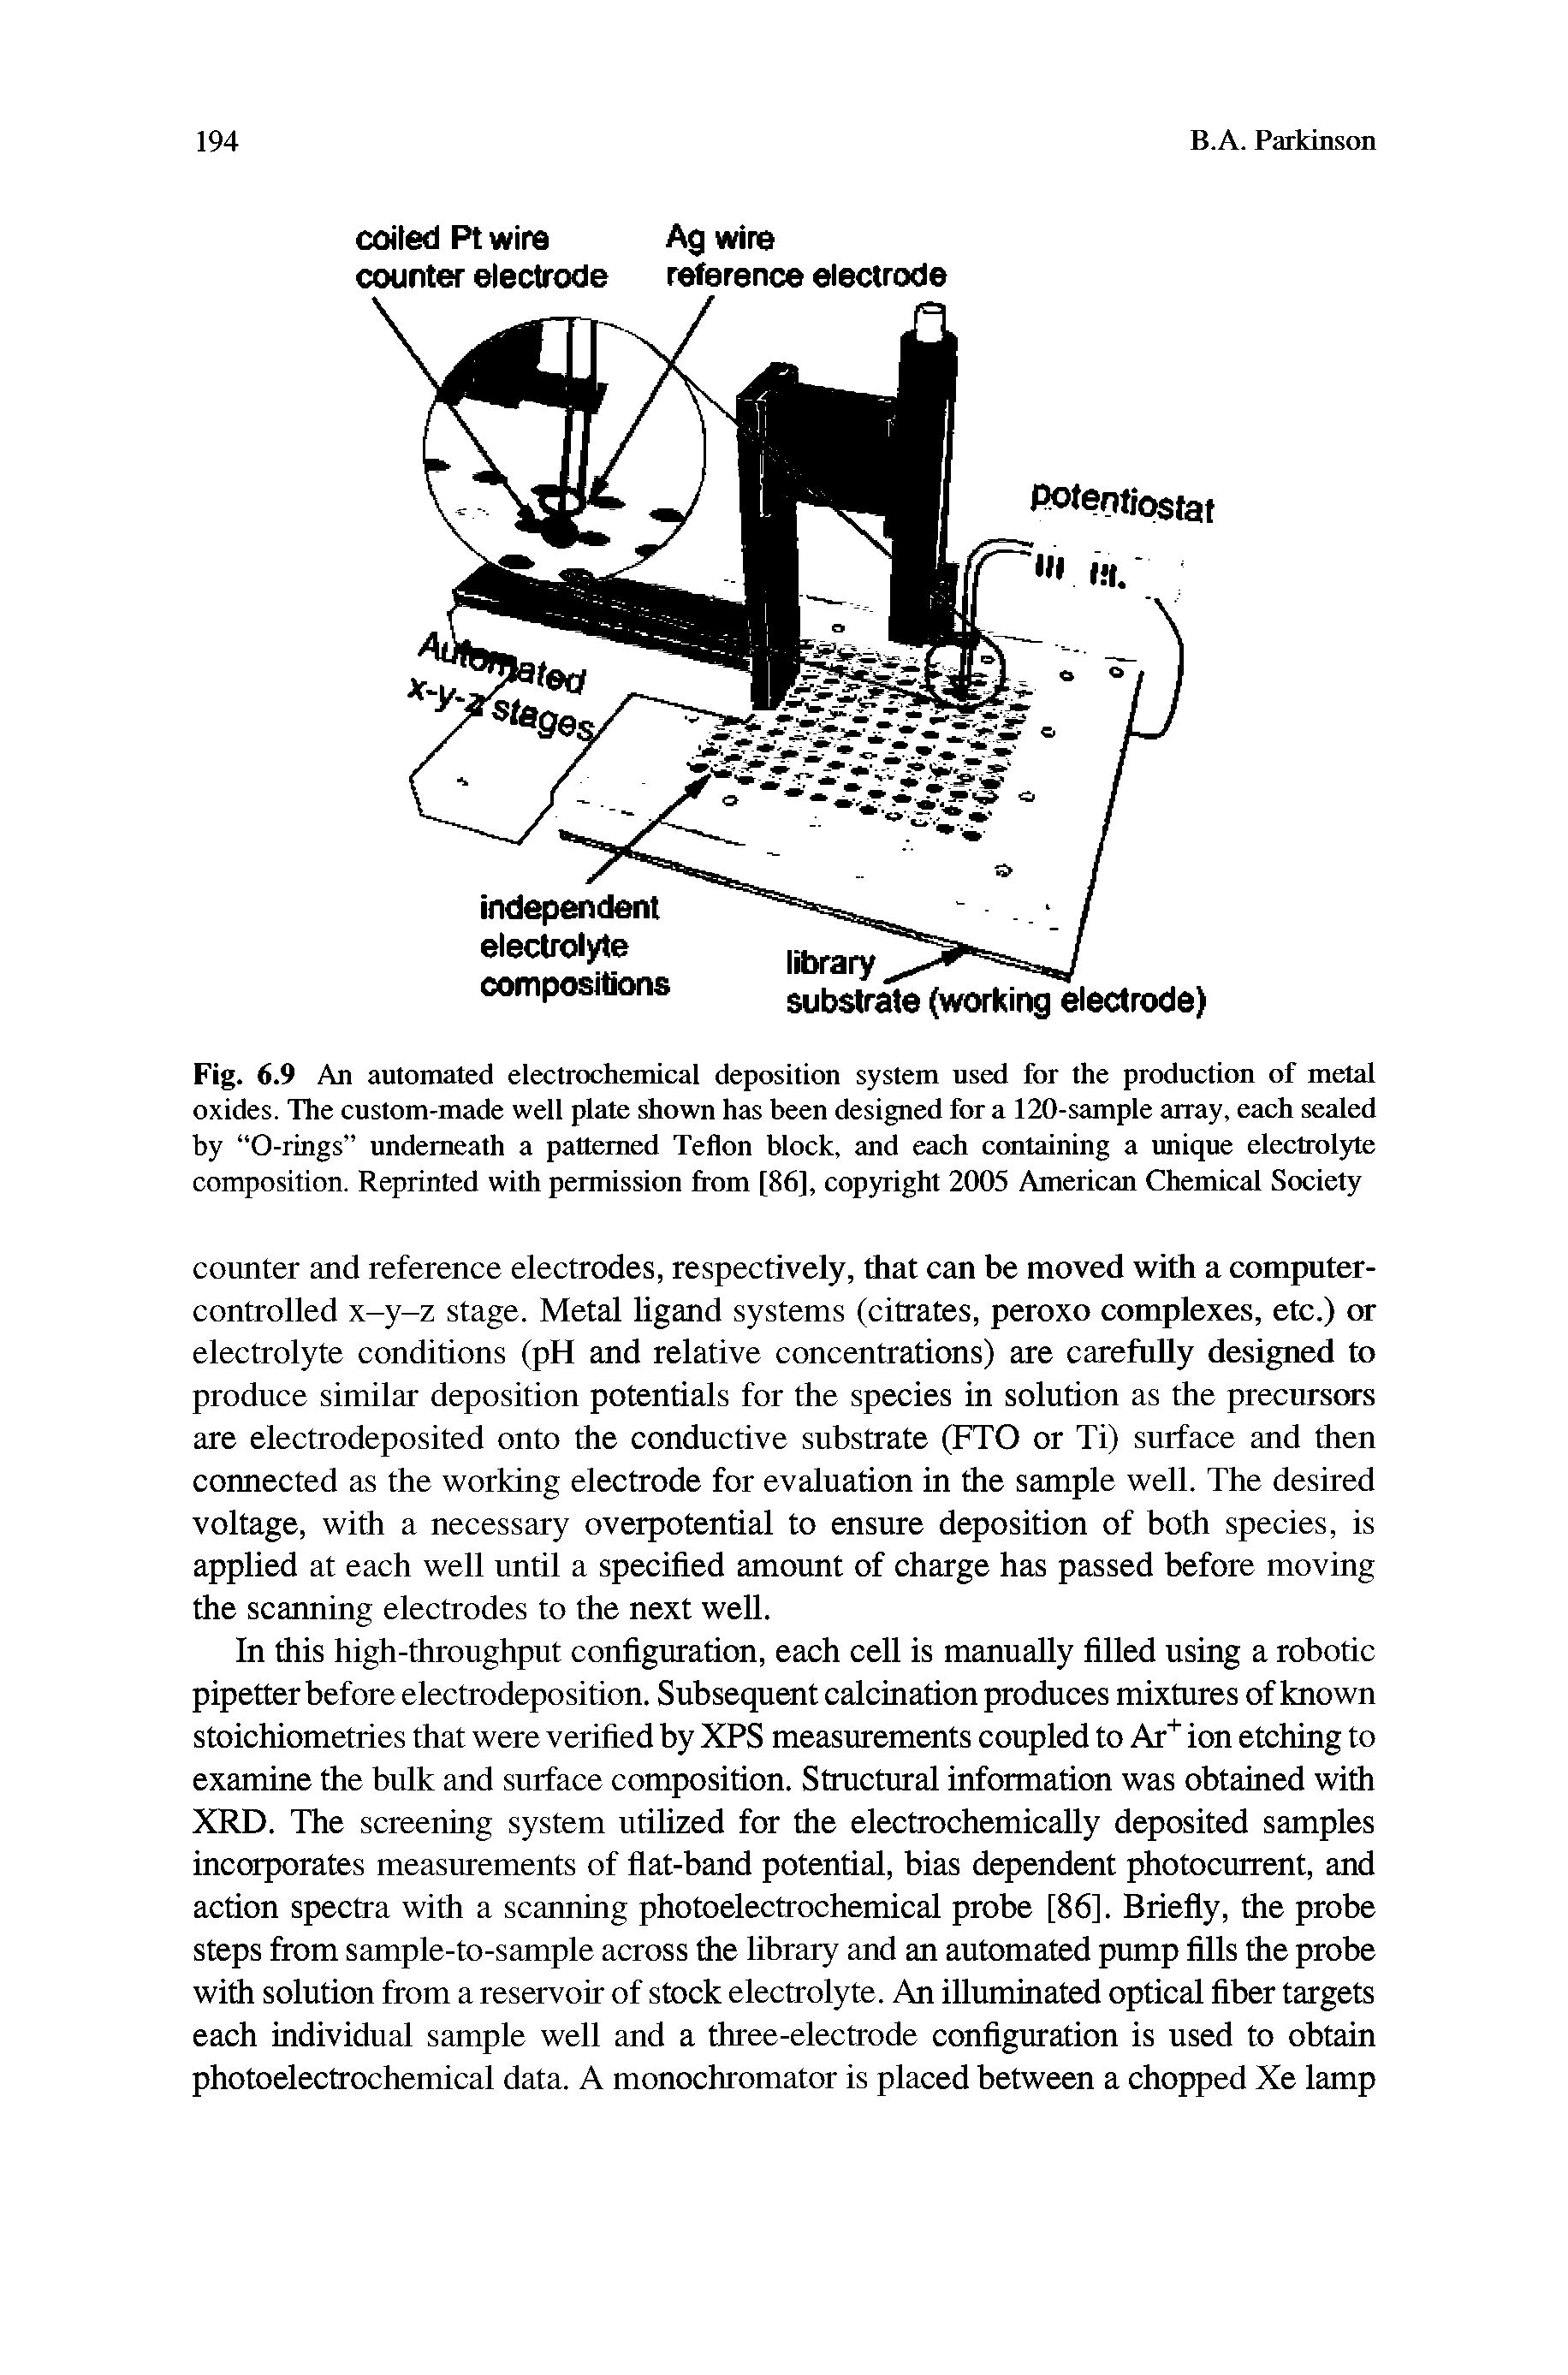 Fig. 6.9 An automated electrochemical deposition system used for the production of metal oxides. The custom-made well plate shown has been designed fora 120-sample array, each sealed by 0-rings underneath a patterned Teflon block, and each containing a unique electrolyte composition. Reprinted with permission from [86], copyright 2005 American Chemical Society...